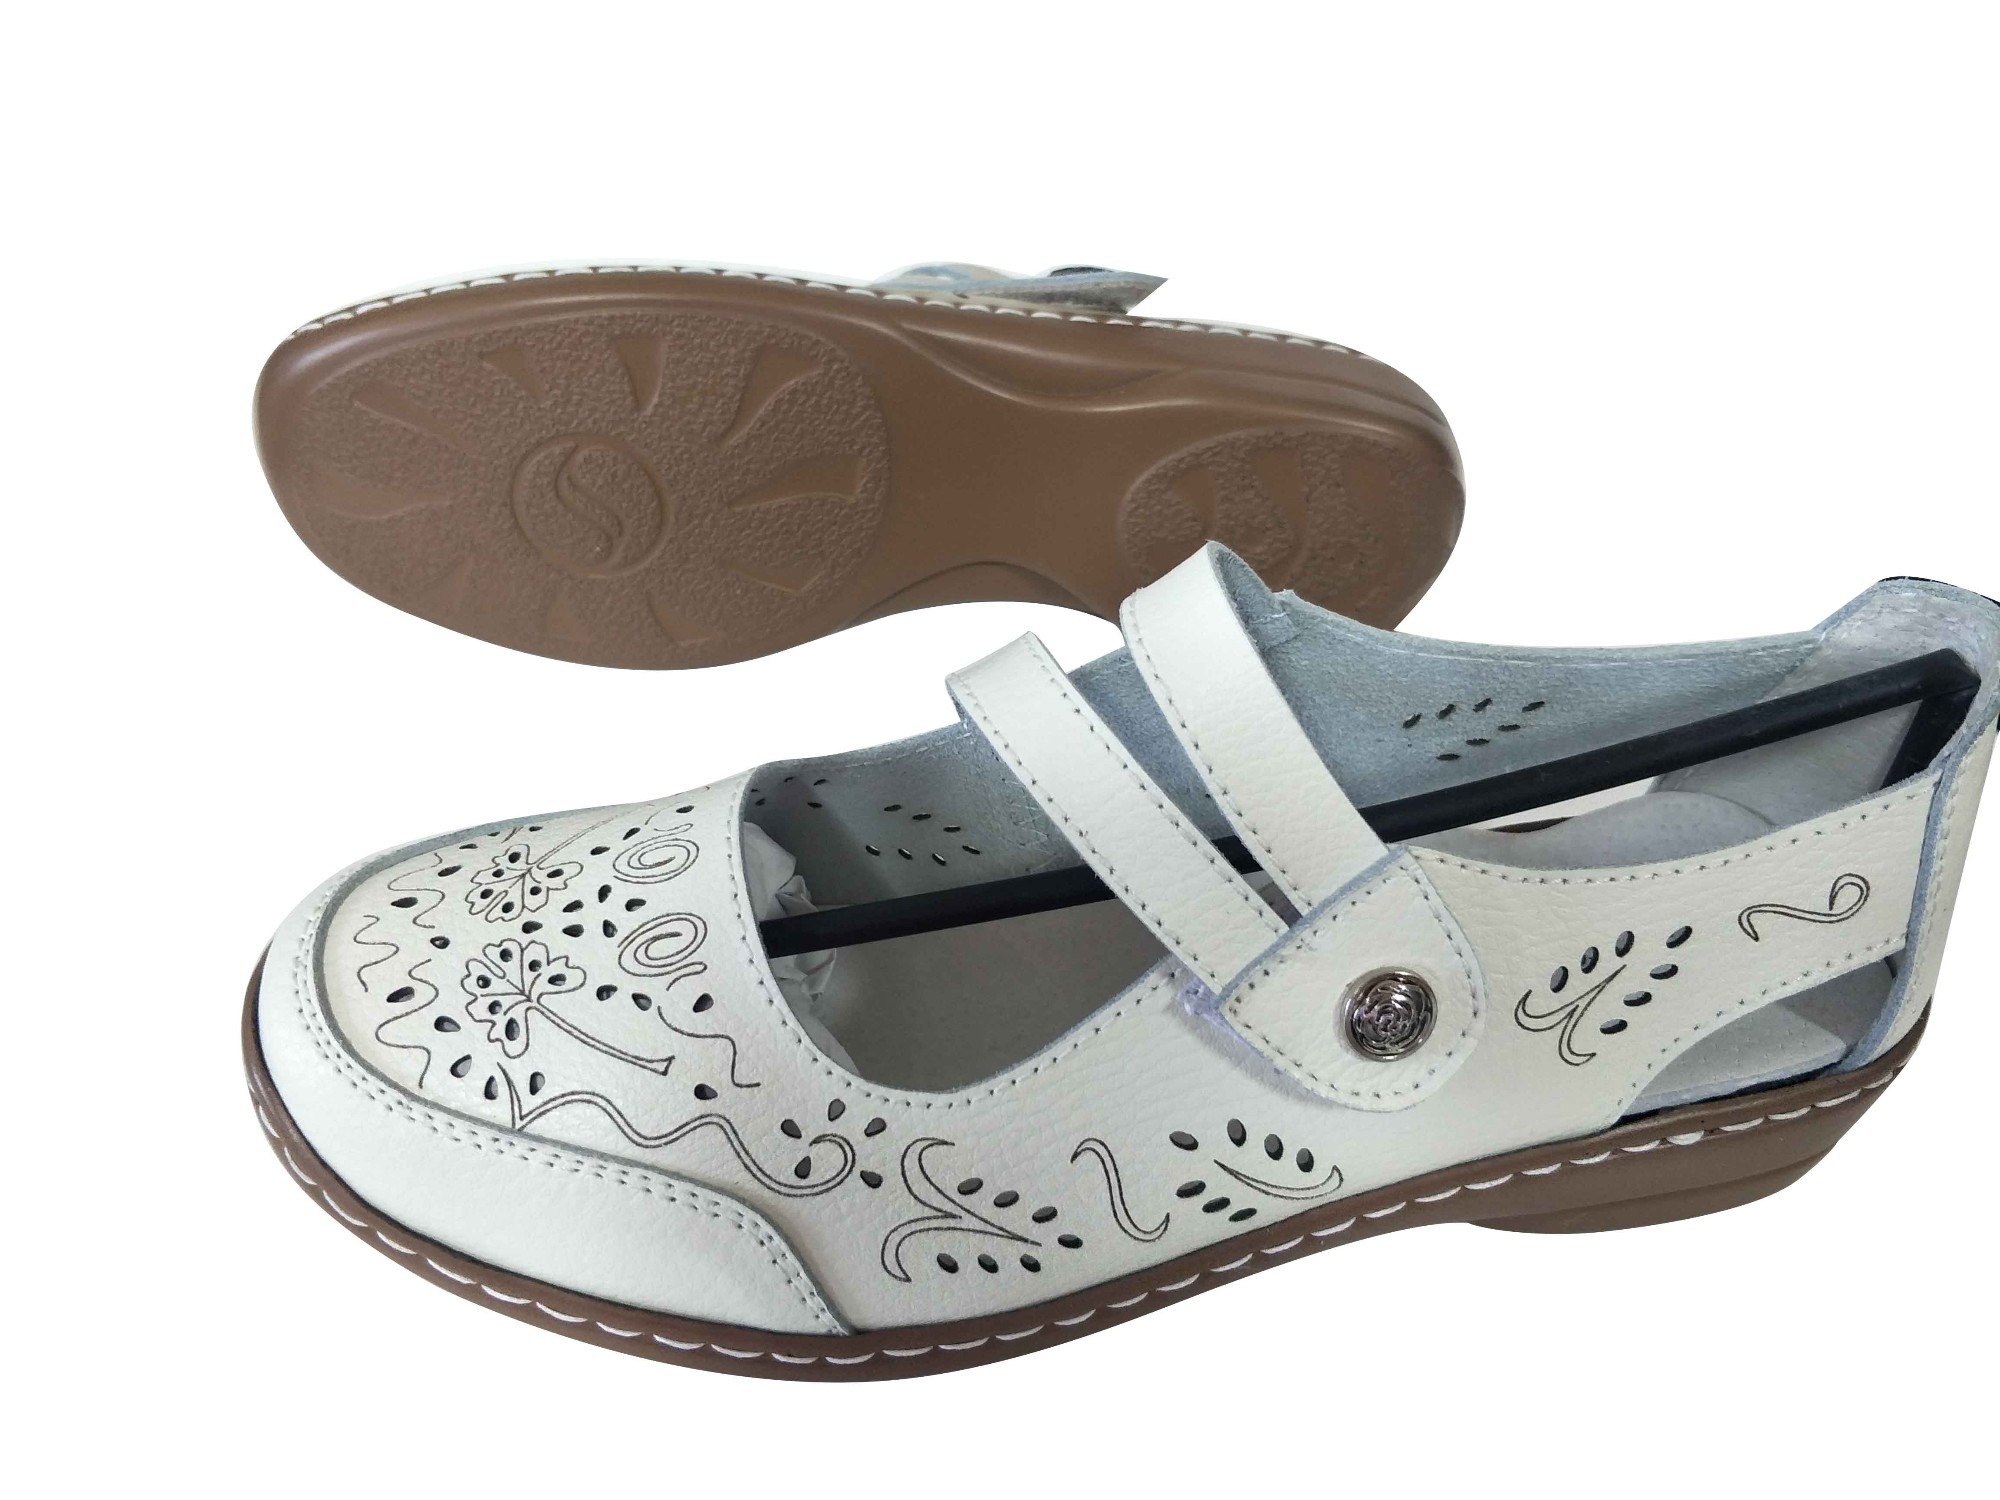 Female hollow out baotou summer leather shoes comfortable soft sandal Manufacturers, Female hollow out baotou summer leather shoes comfortable soft sandal Factory, Supply Female hollow out baotou summer leather shoes comfortable soft sandal